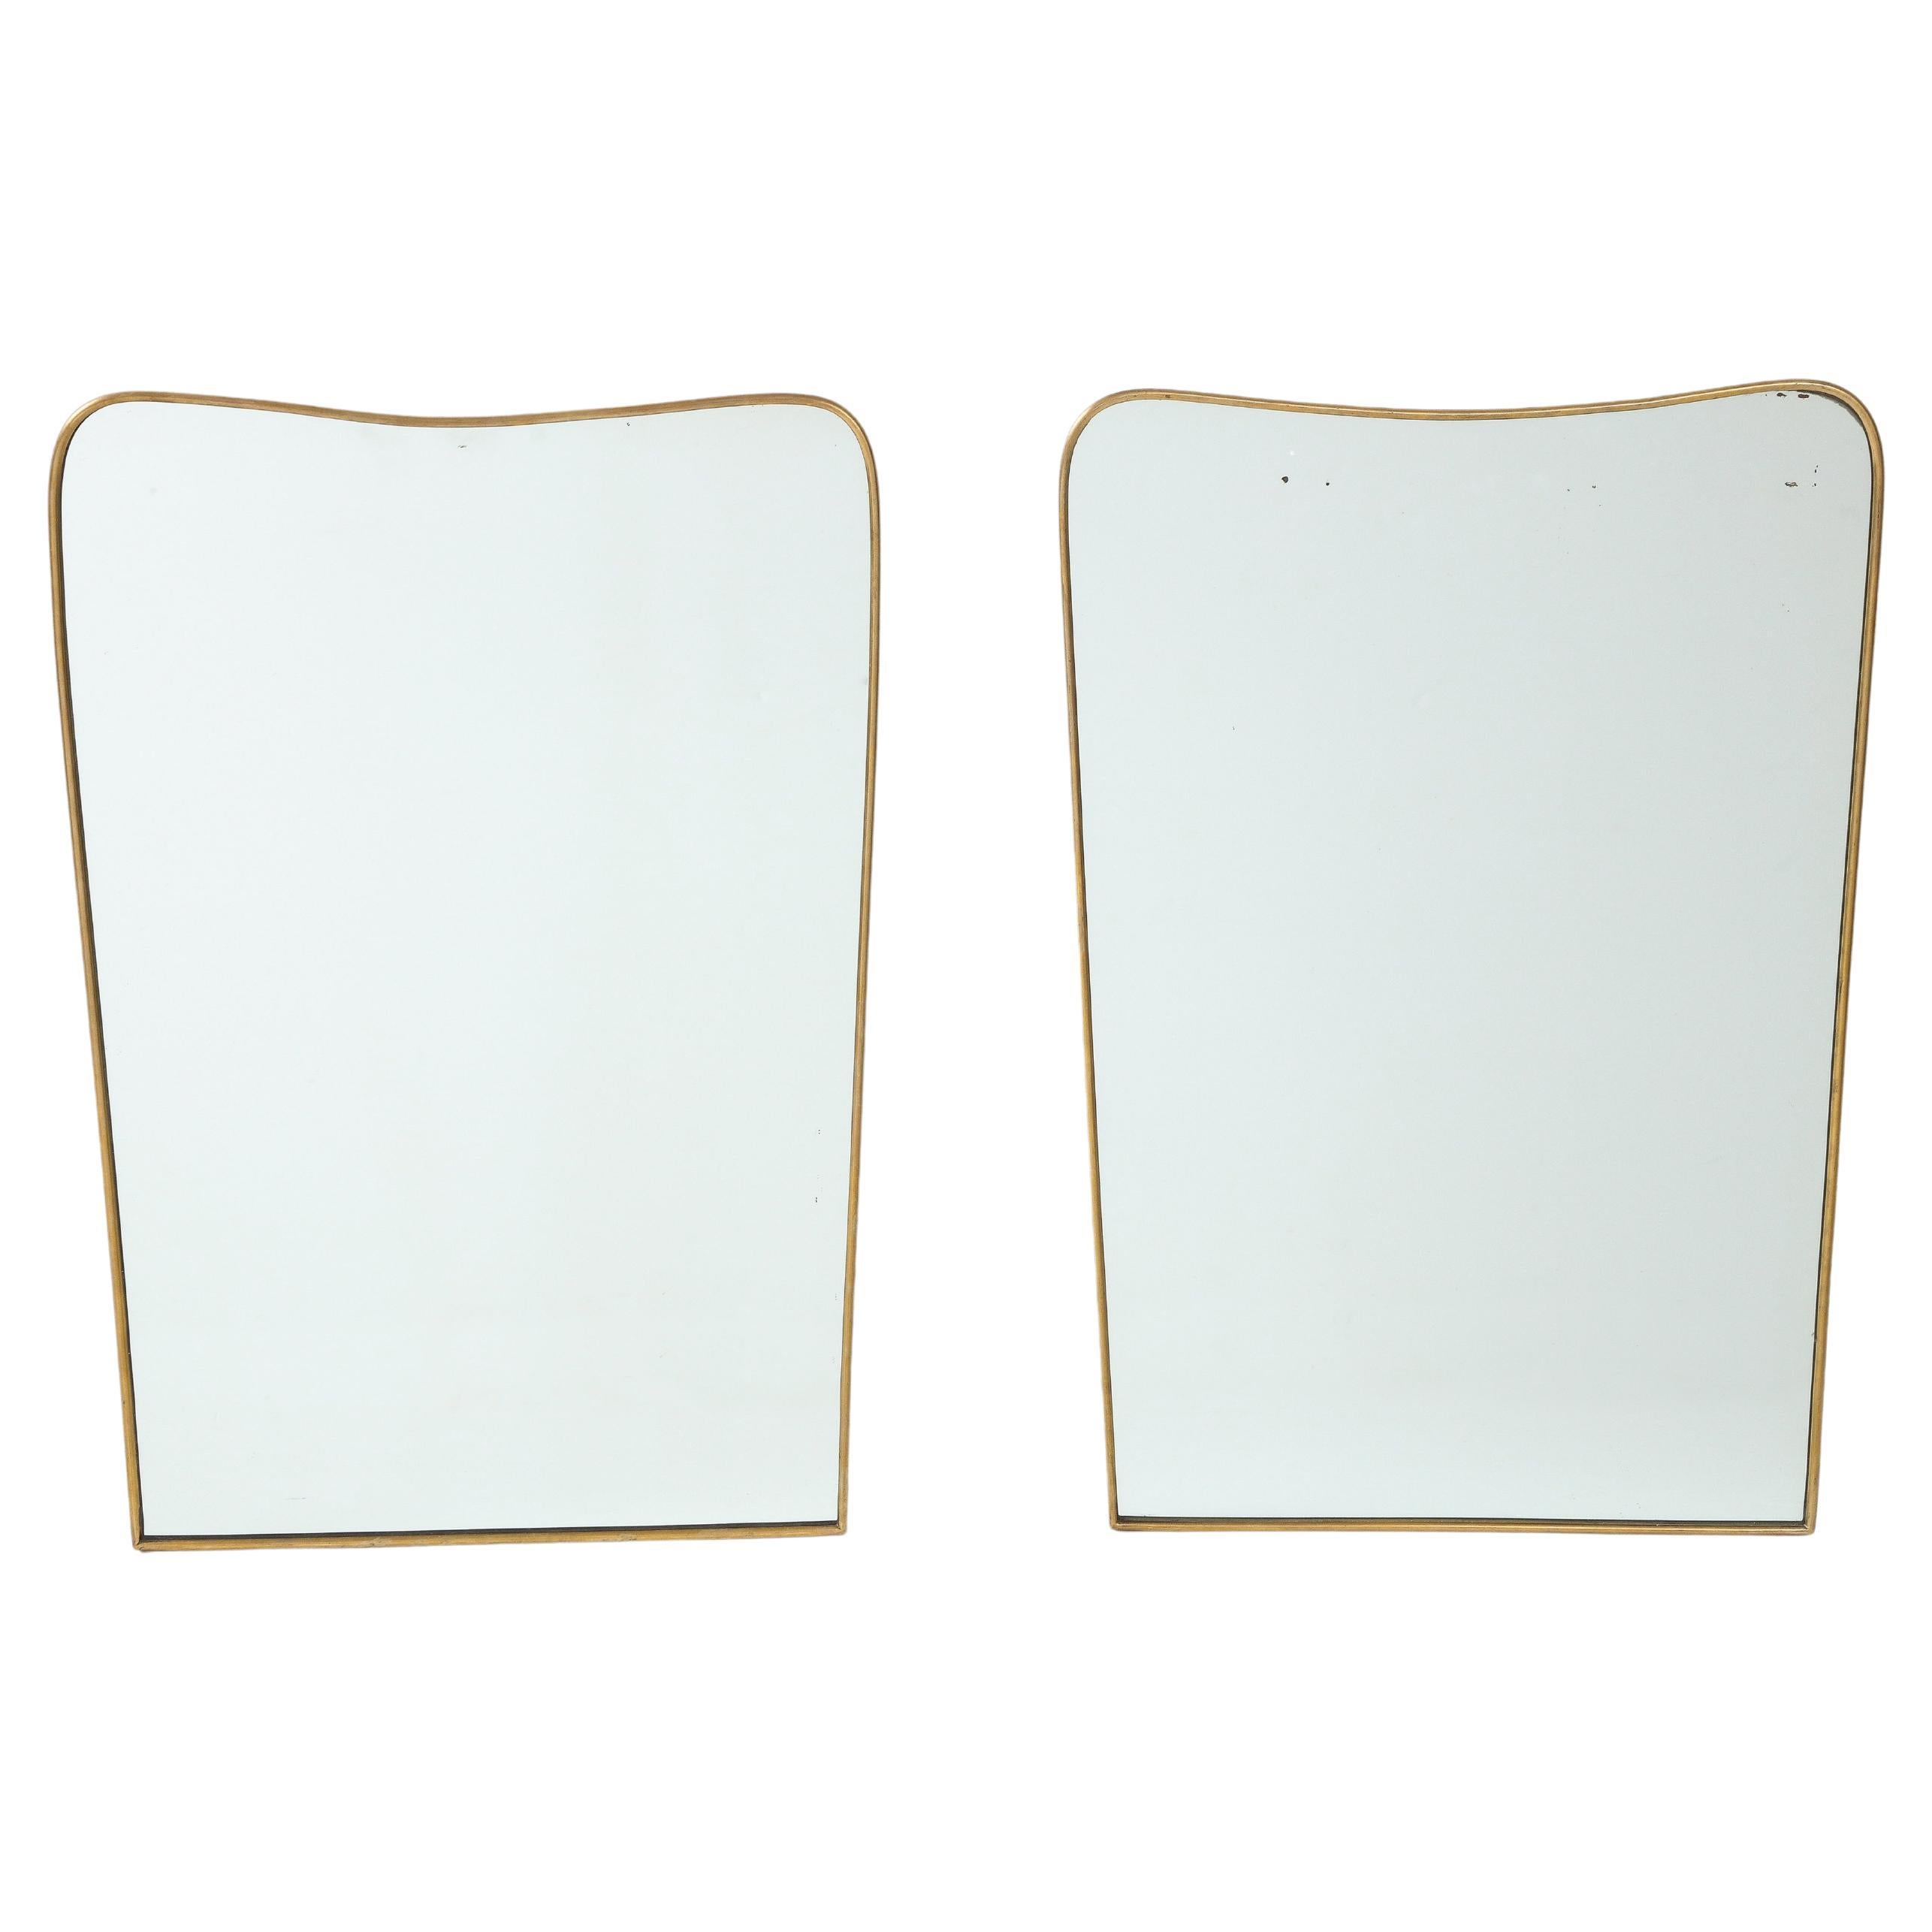 1950s Italian Modernist Pair of Shaped Brass Mirrors For Sale